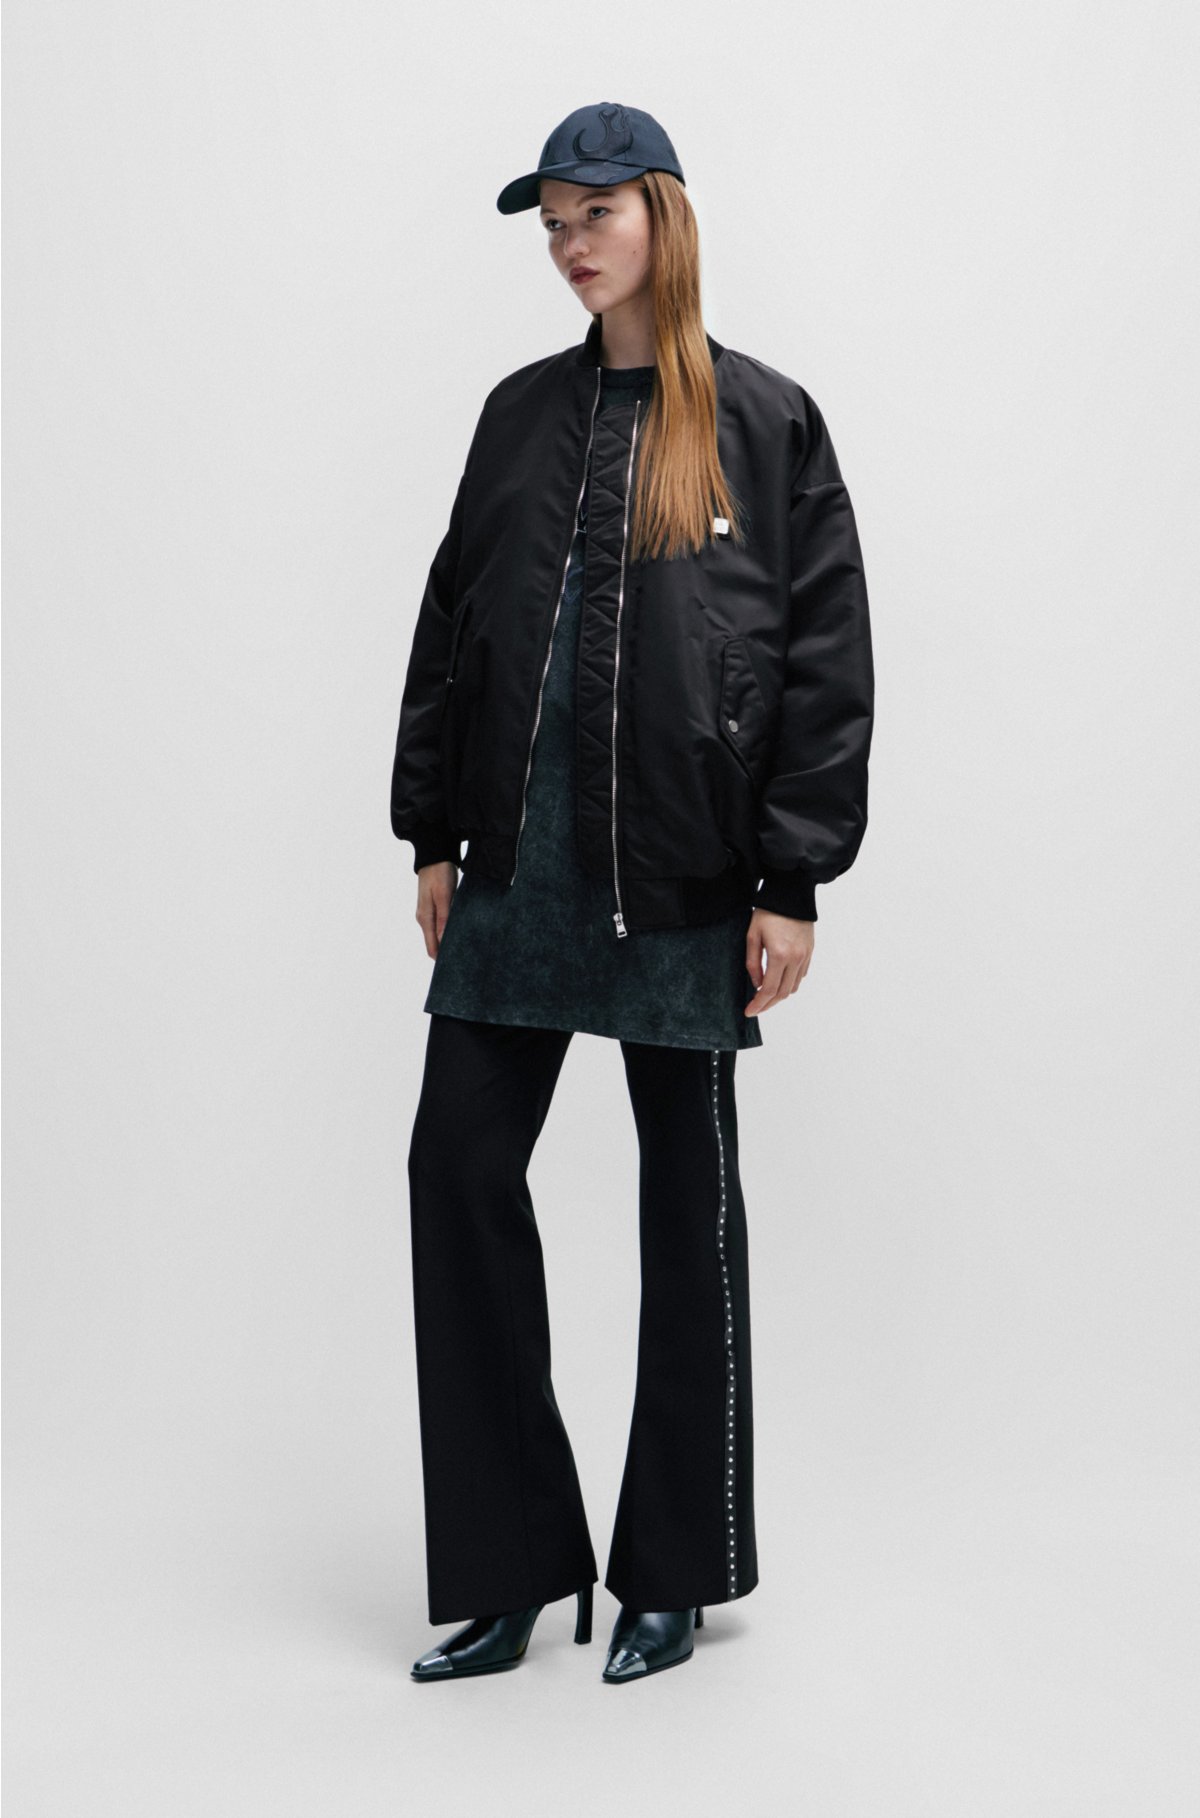 Oversized-fit bomber jacket in water-repellent fabric, Black